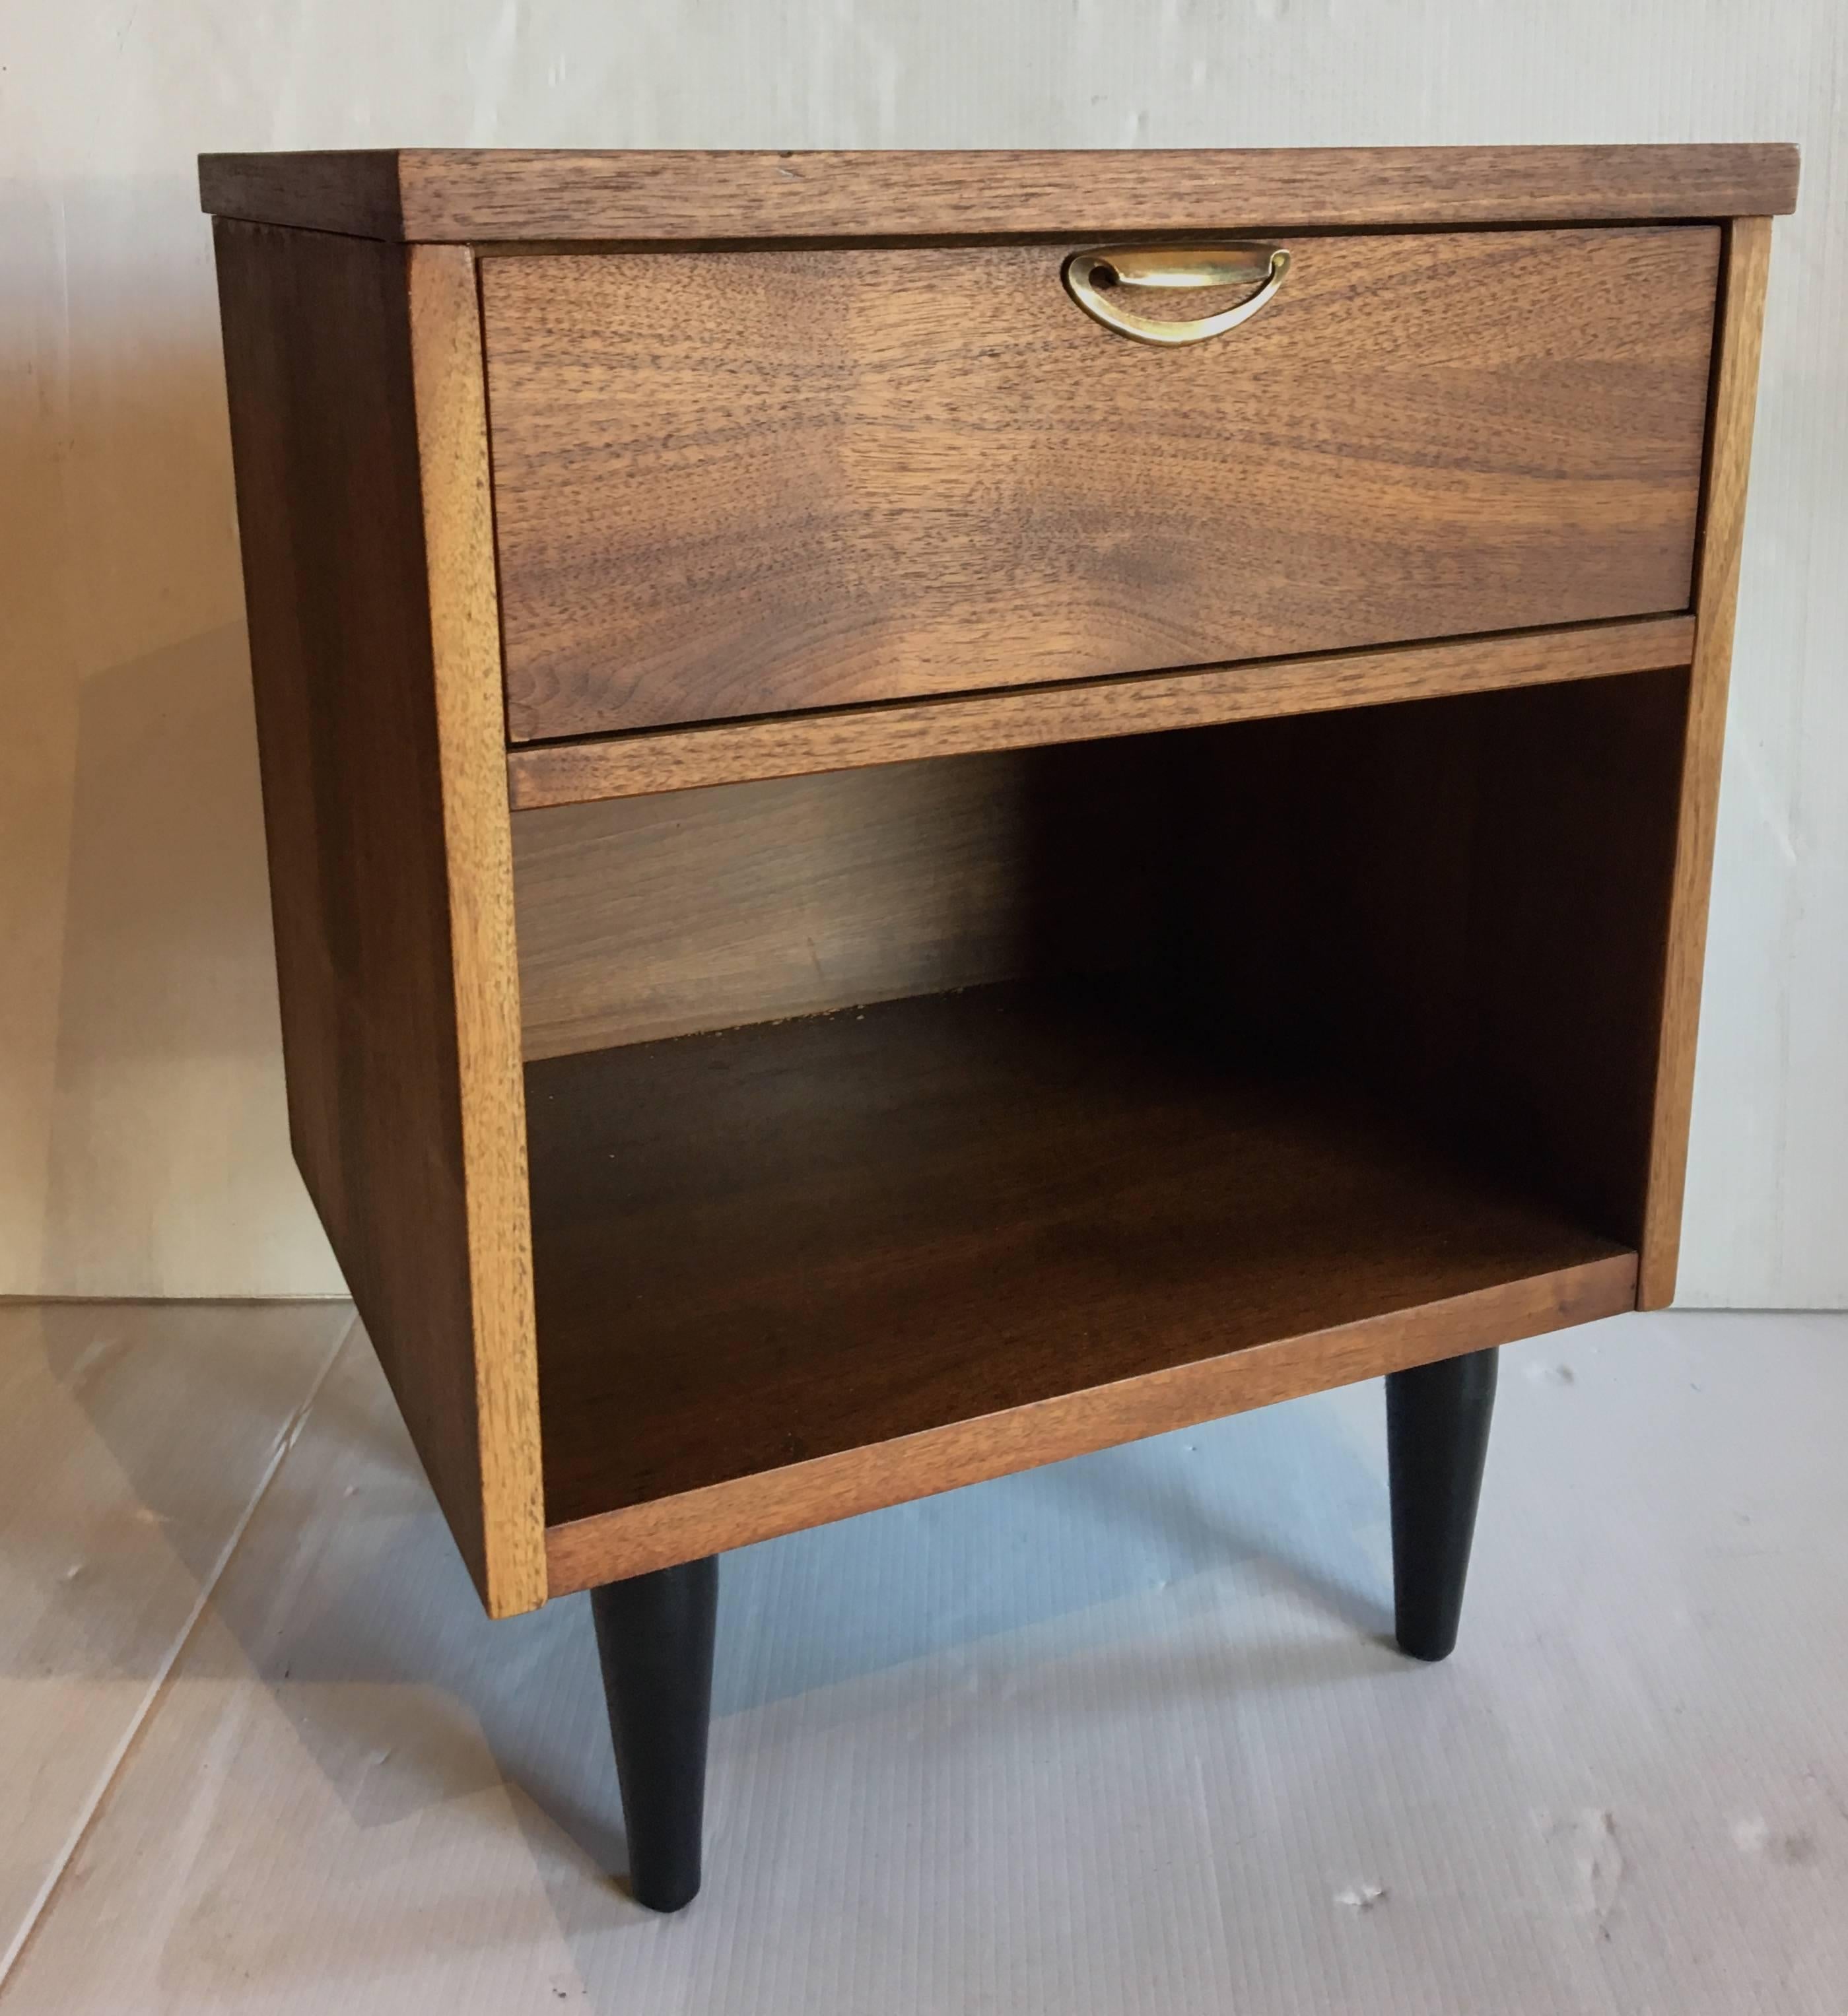 Nice pair of nightstands circa 1950s, American walnut with brass polished pulls and black lacquer taper legs, freshly refinished sanded and finished with hand rubbed oil finish, nicely crafted with dovetail drawers.